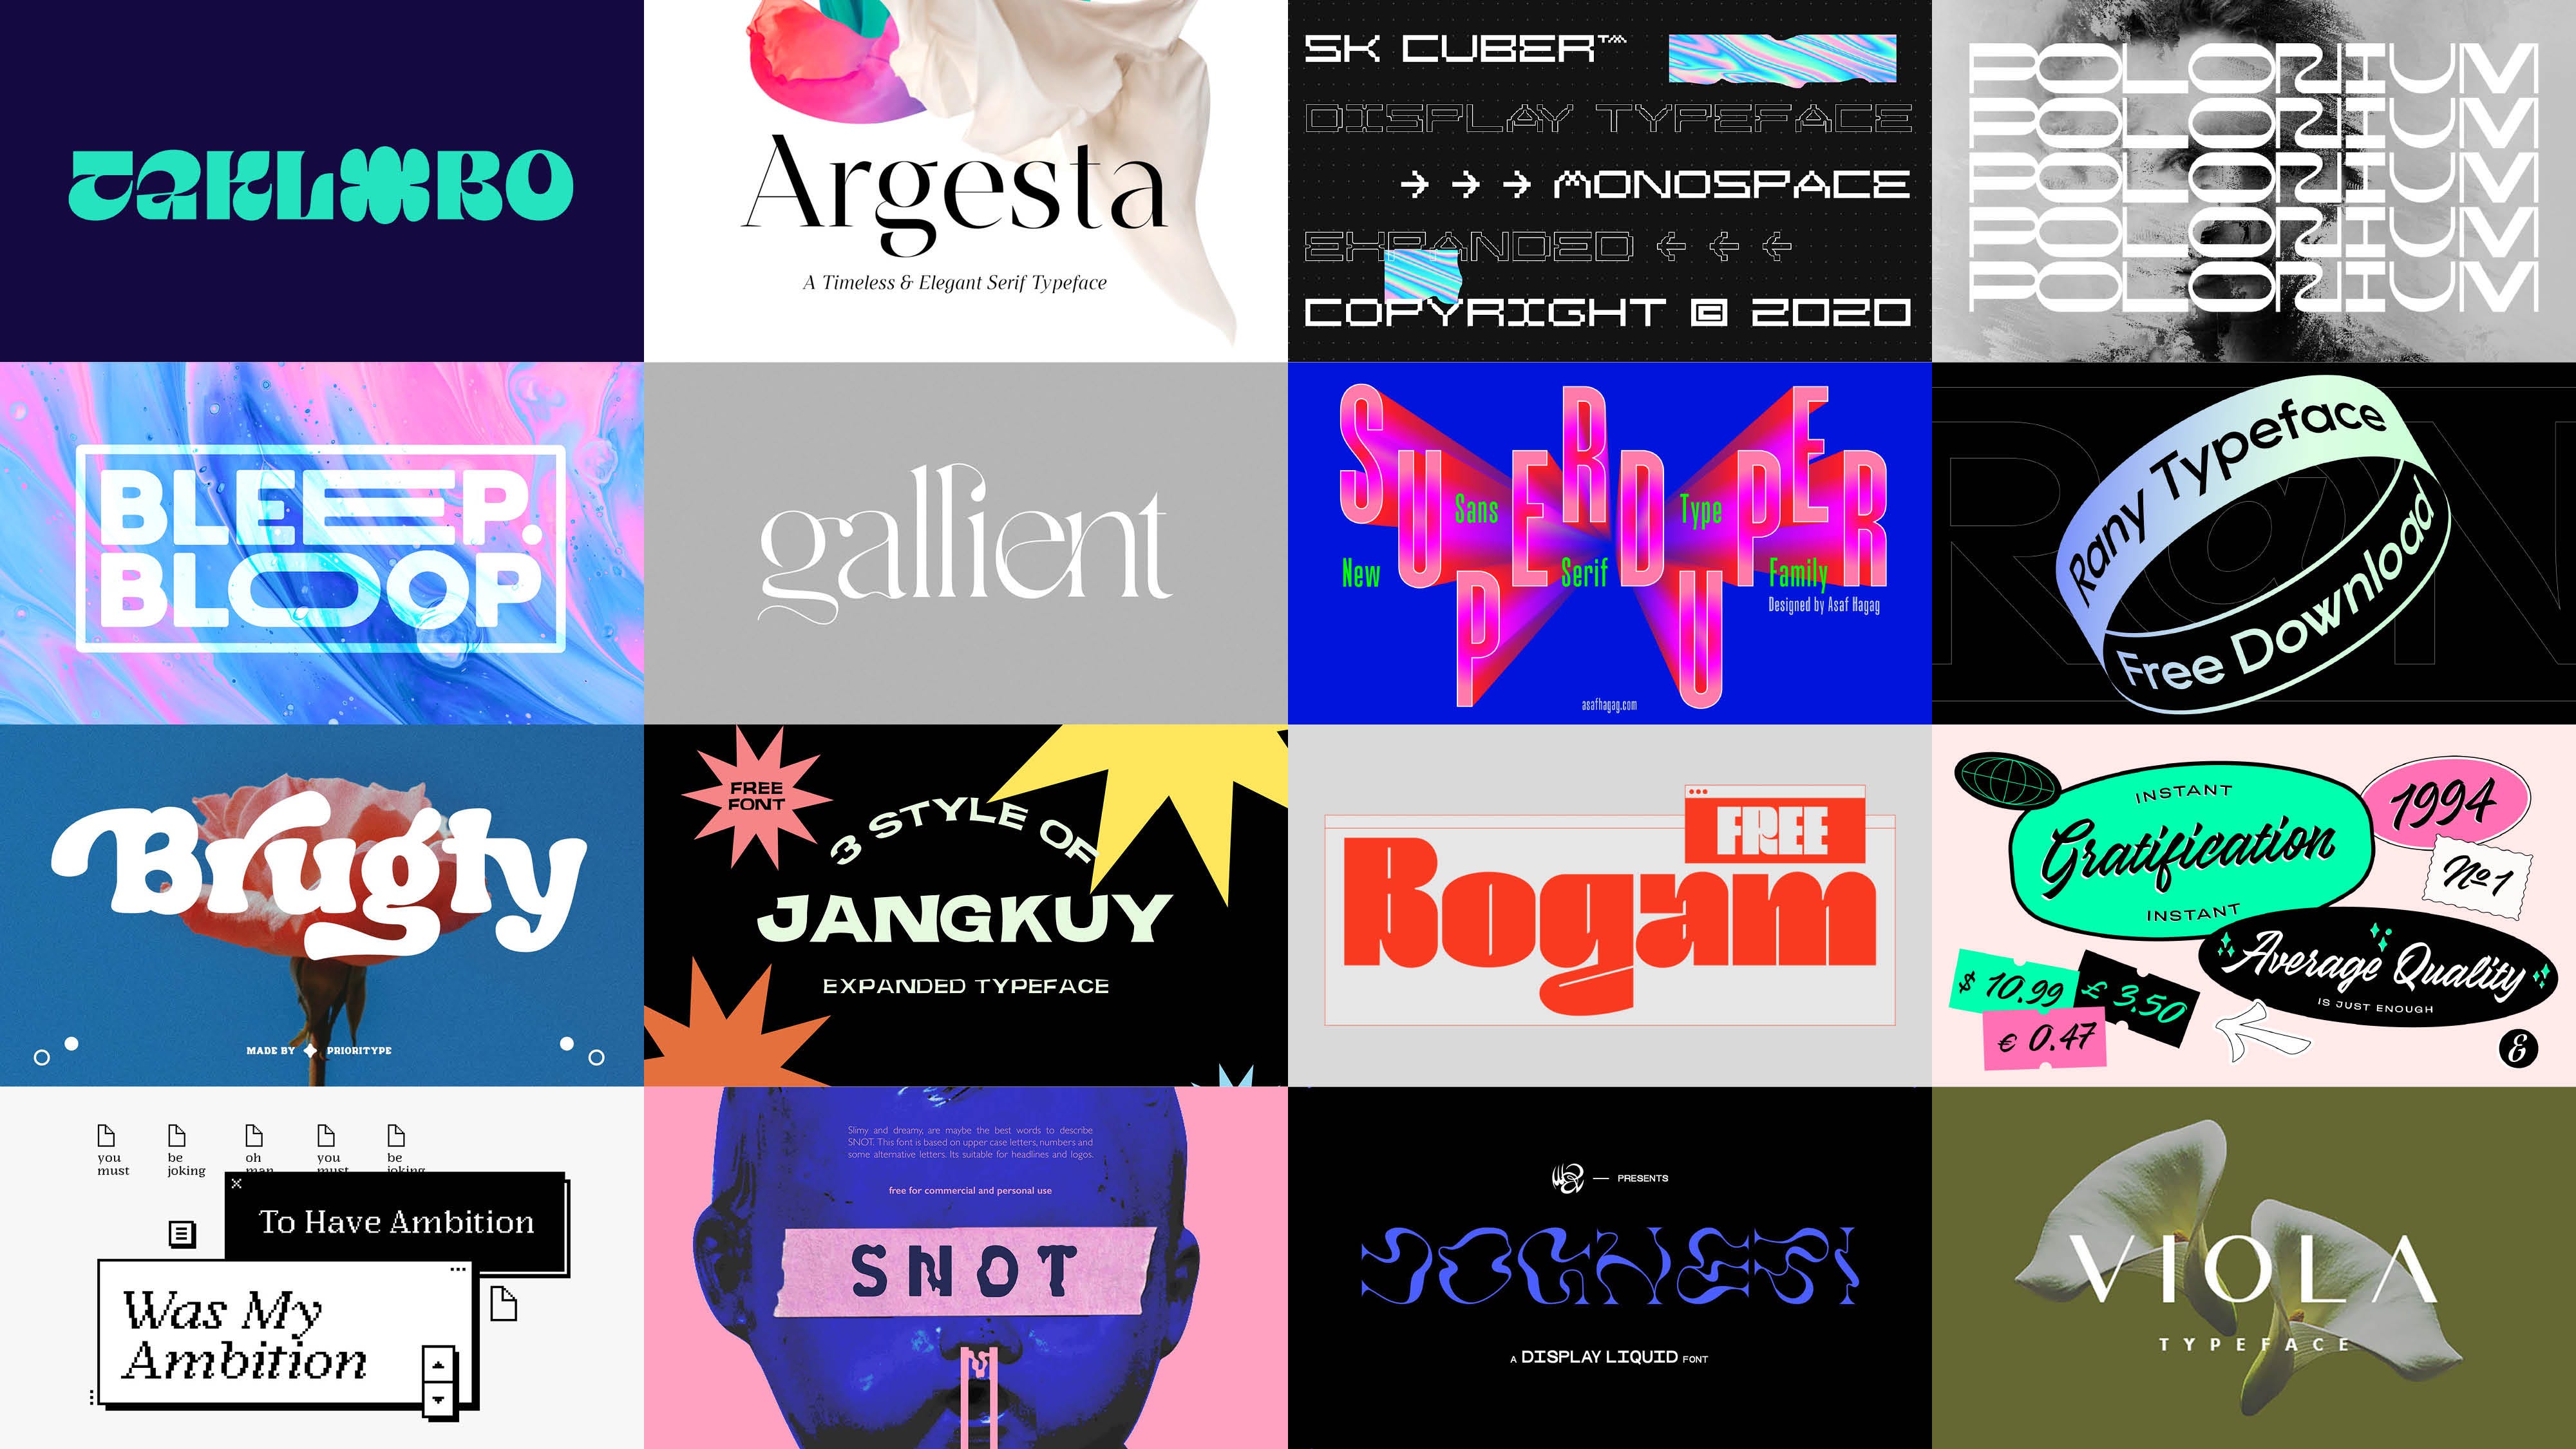 50 free stylish fonts to bring a elegance to any design